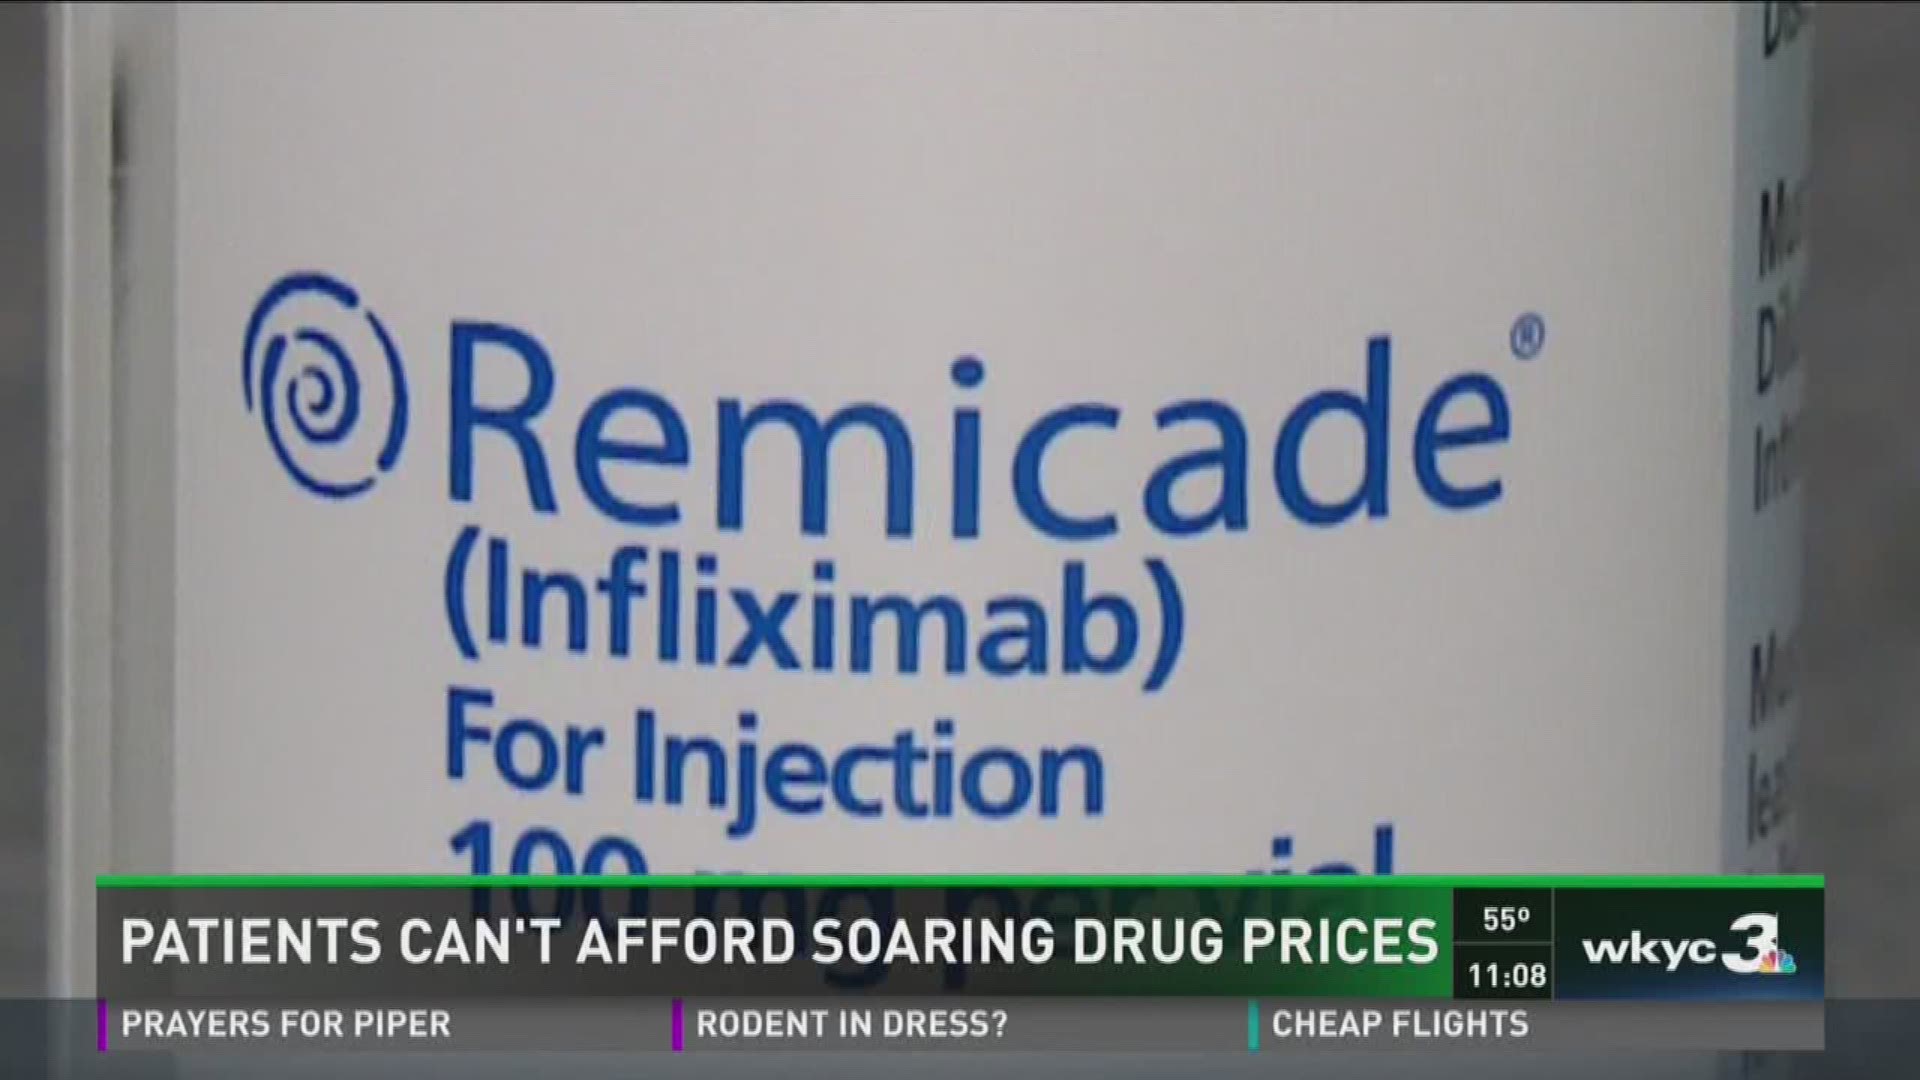 Patients can't afford soaring drug prices